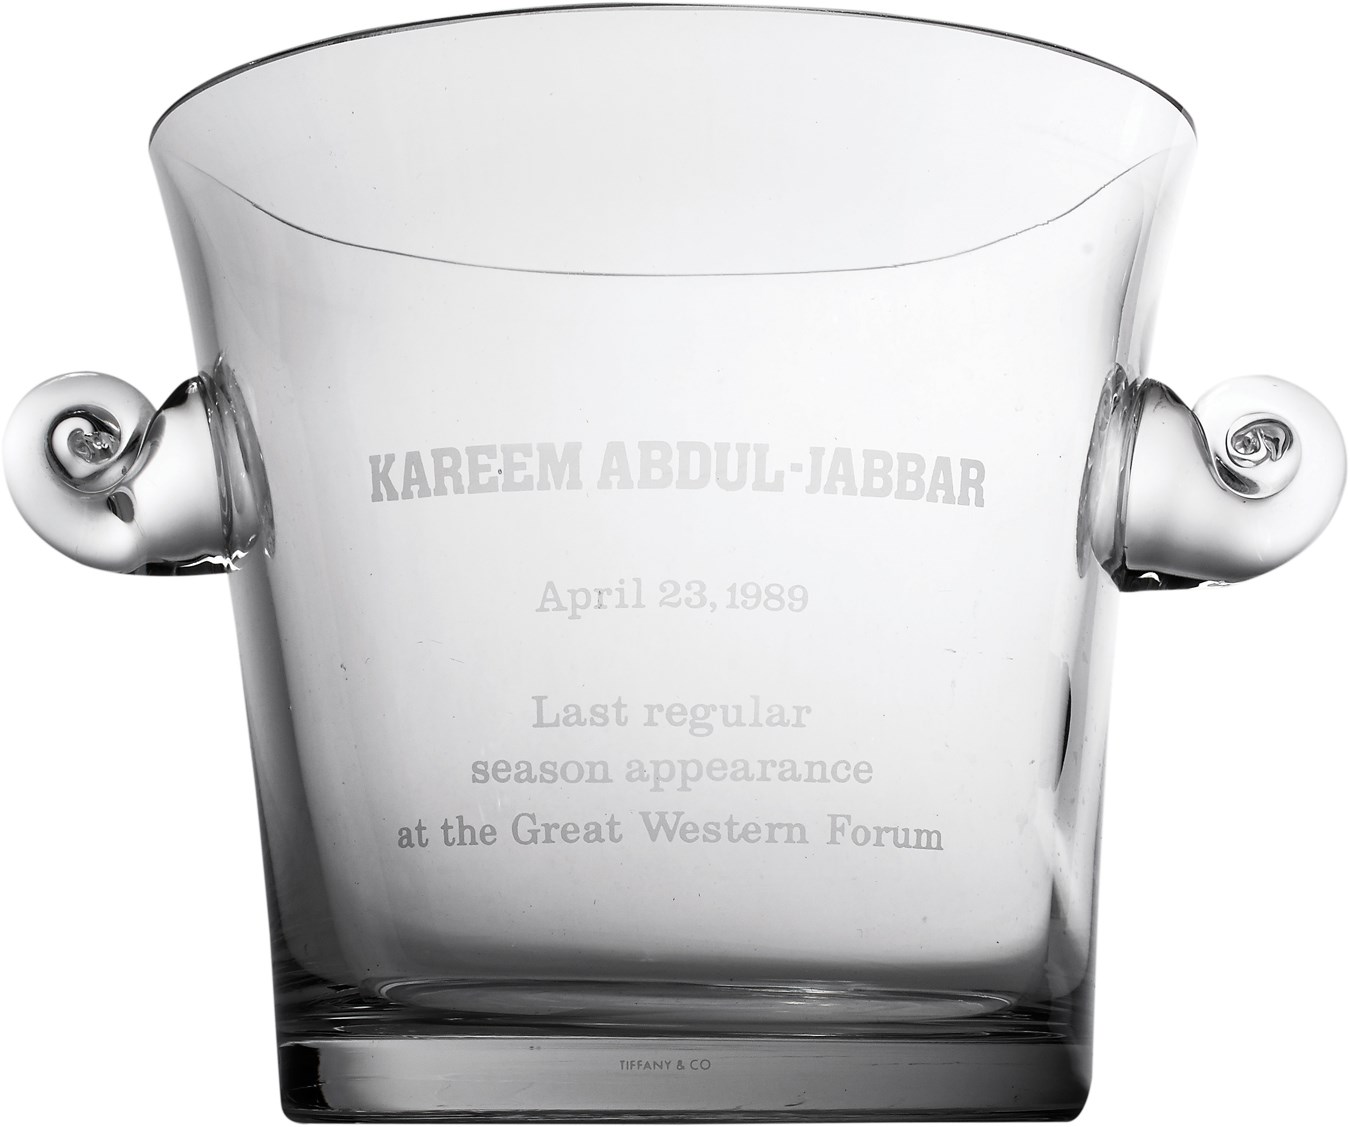 Basketball - 1989 Kareem Abdul-Jabbar "Last Game At The Forum" Crystal Champagne Bucket by Tiffany & Co.